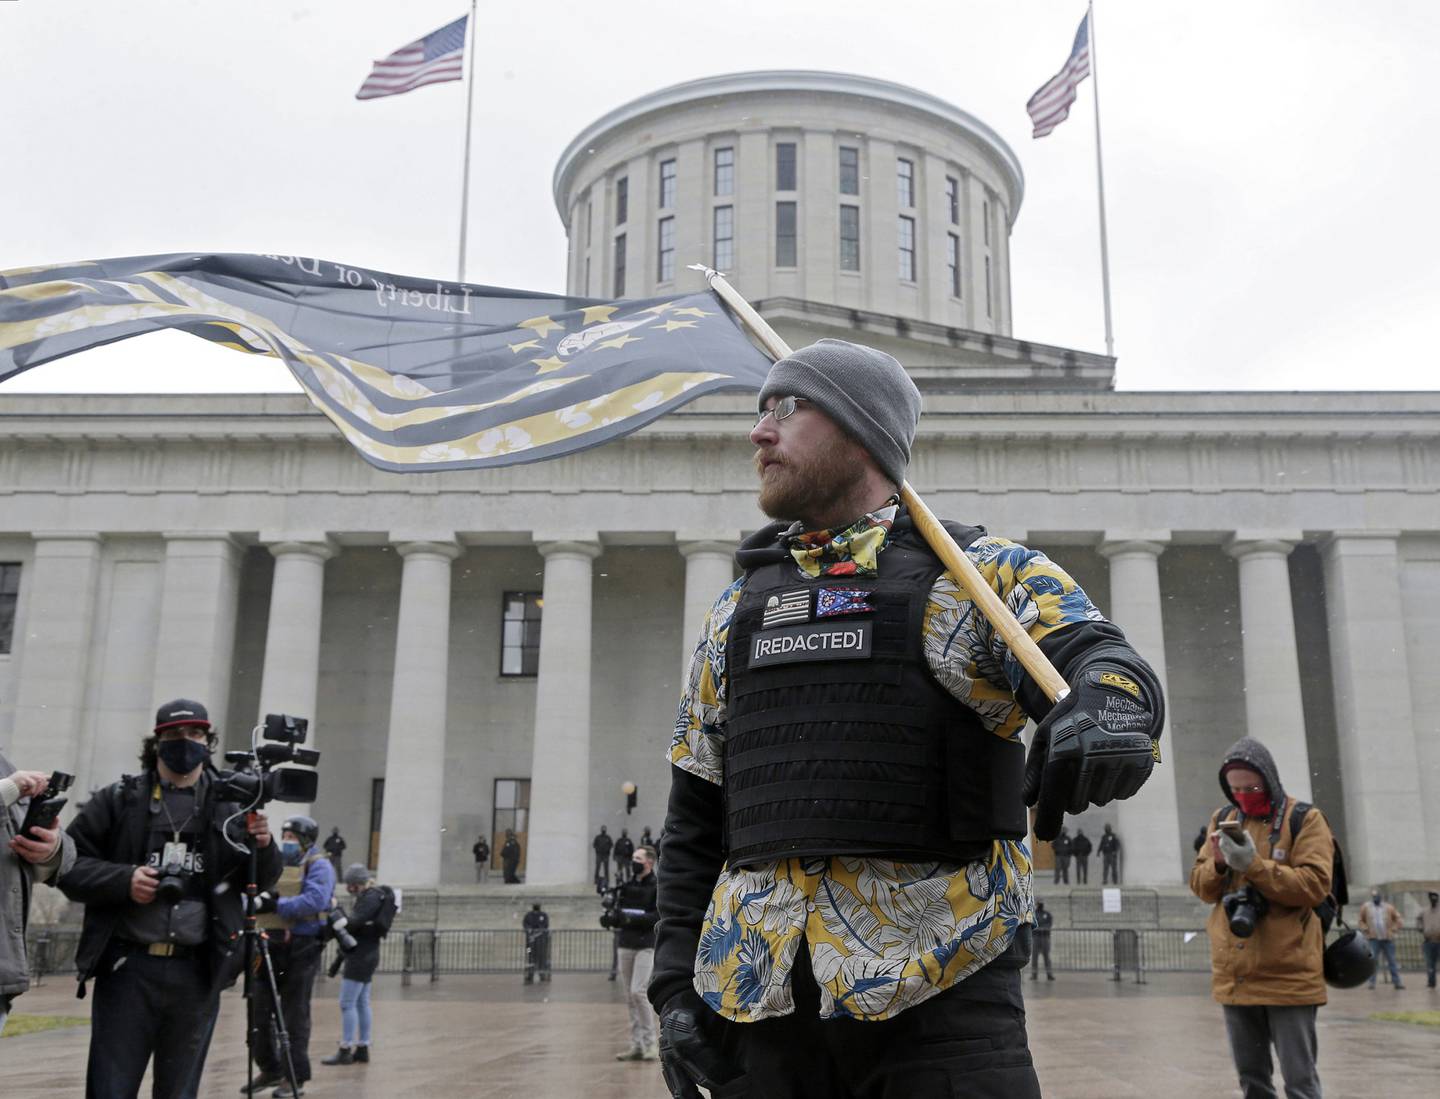 Members of the Boogaloo Boys attend protest Sunday at the Ohio Statehouse in downtown Columbus, Ohio, Sunday, Jan. 17, 2021.